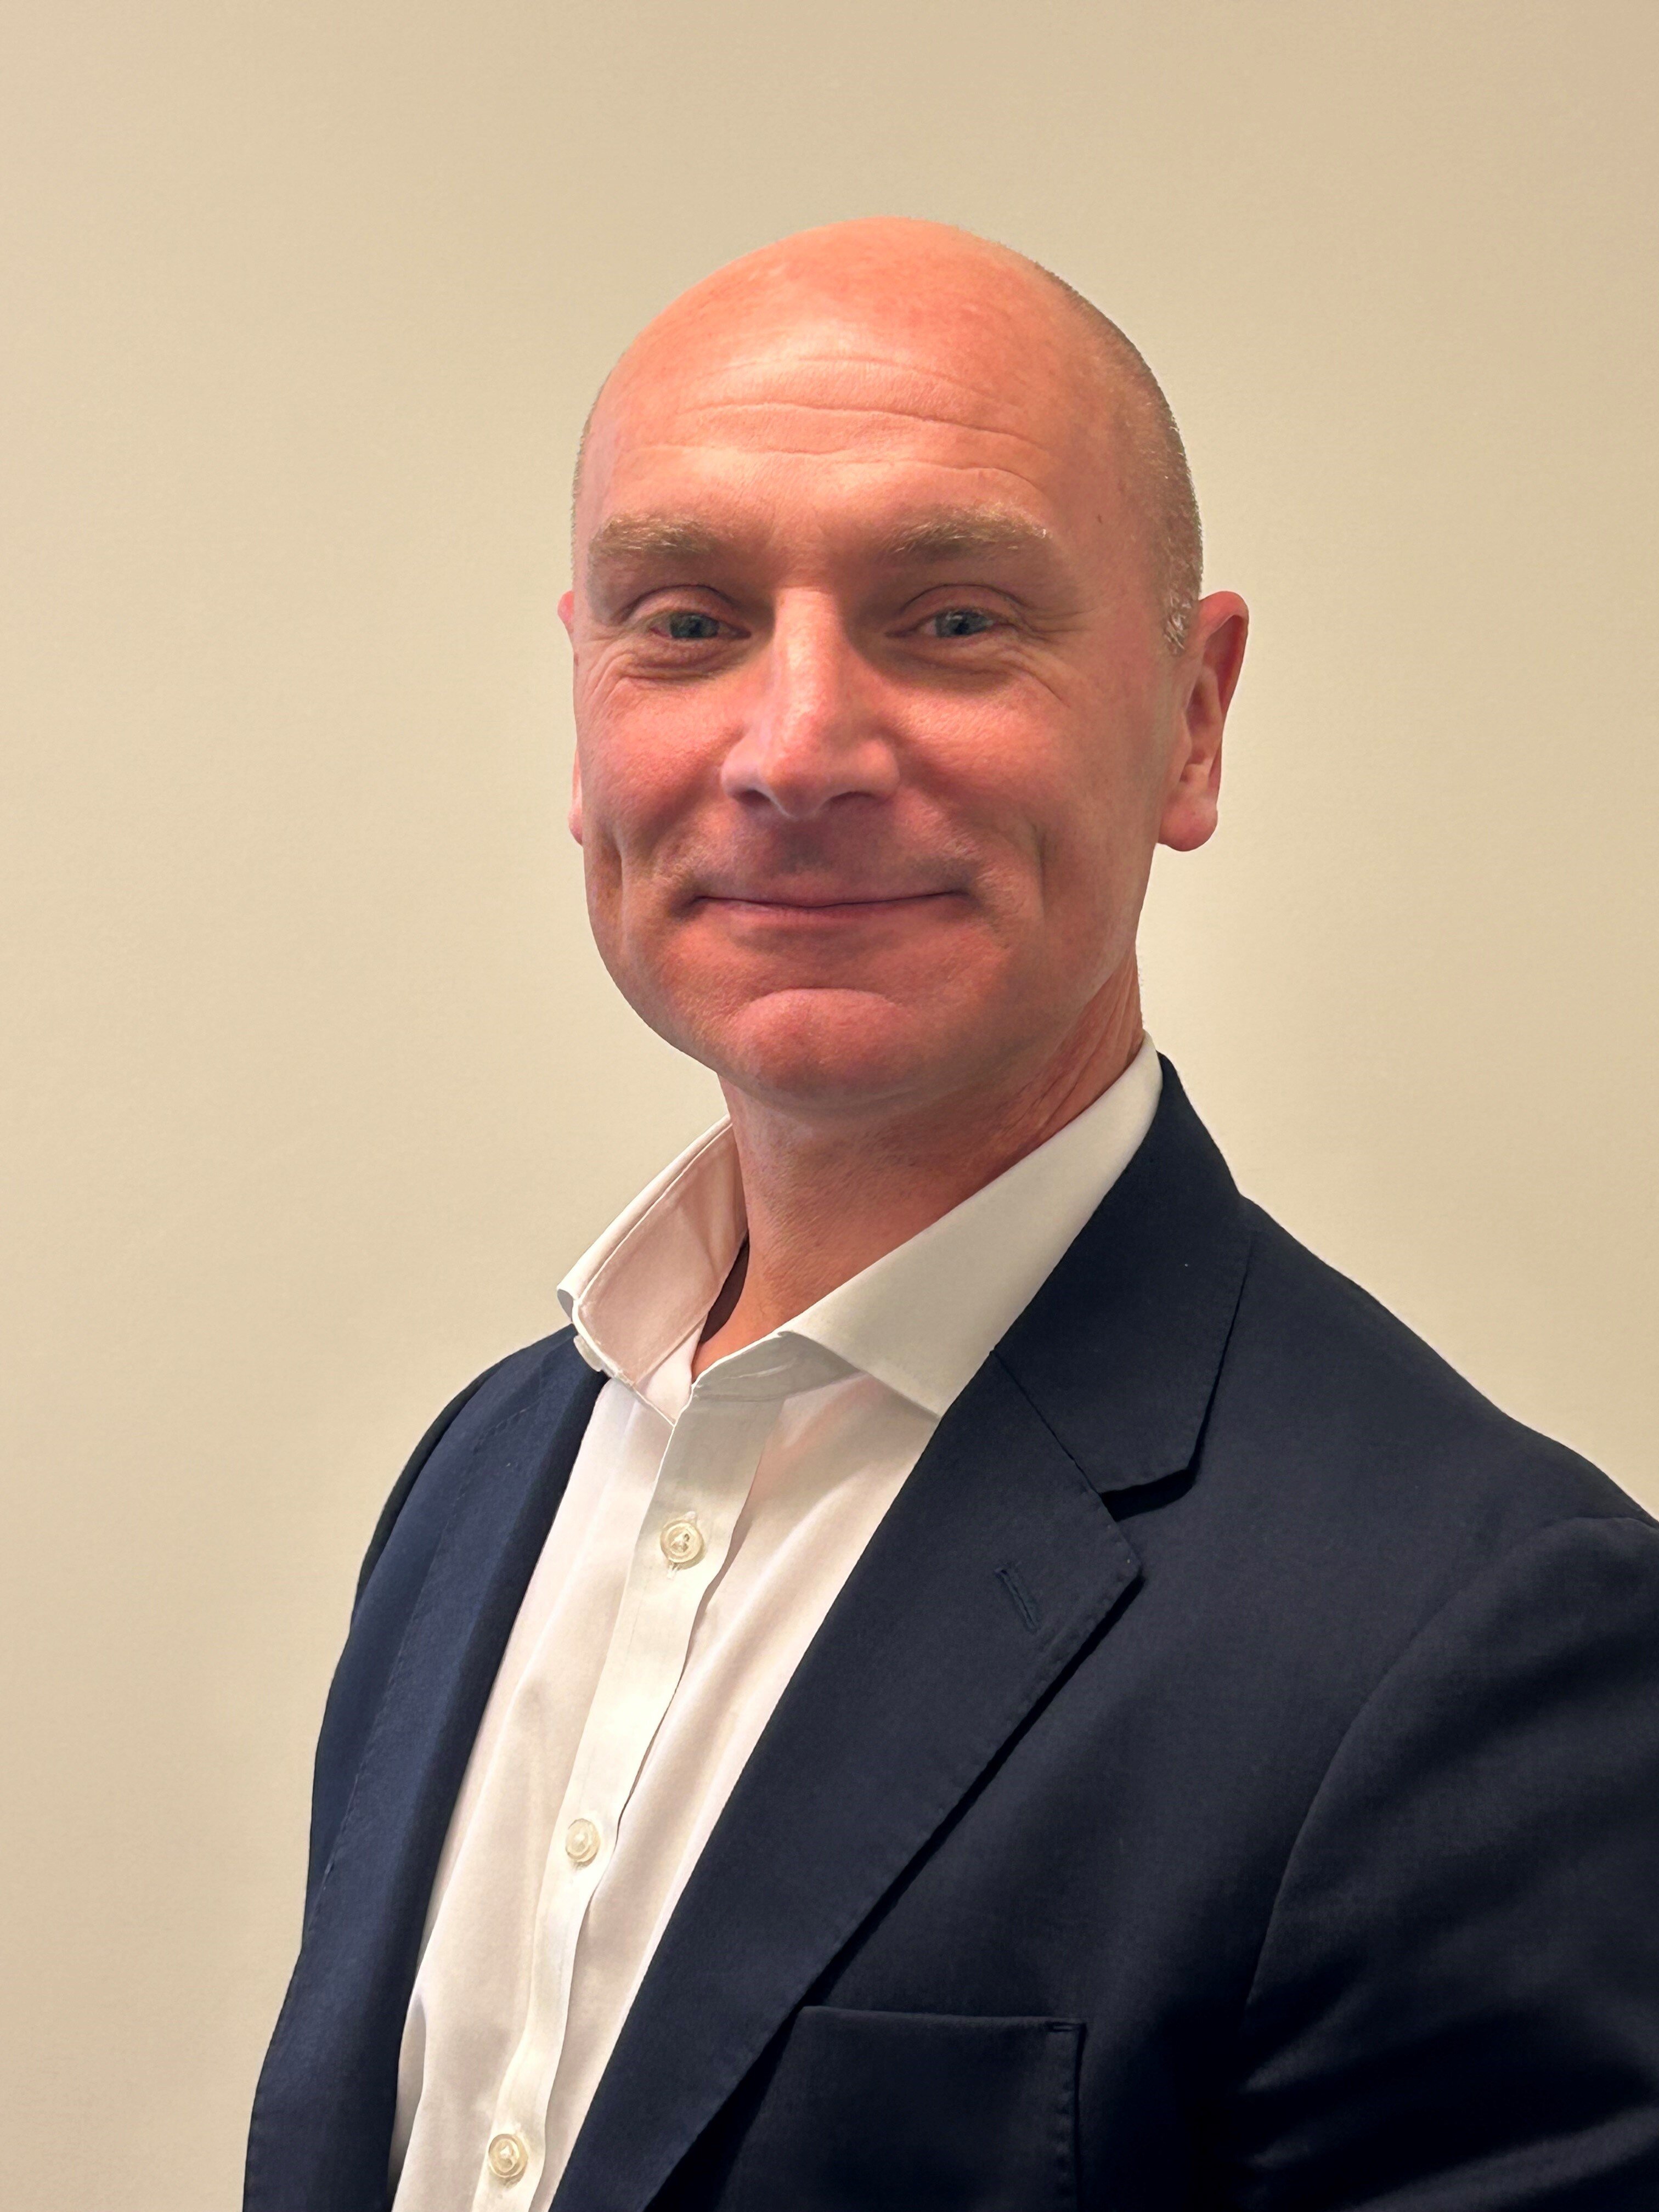 CH&Co appoints Matthew Brown managing director for education